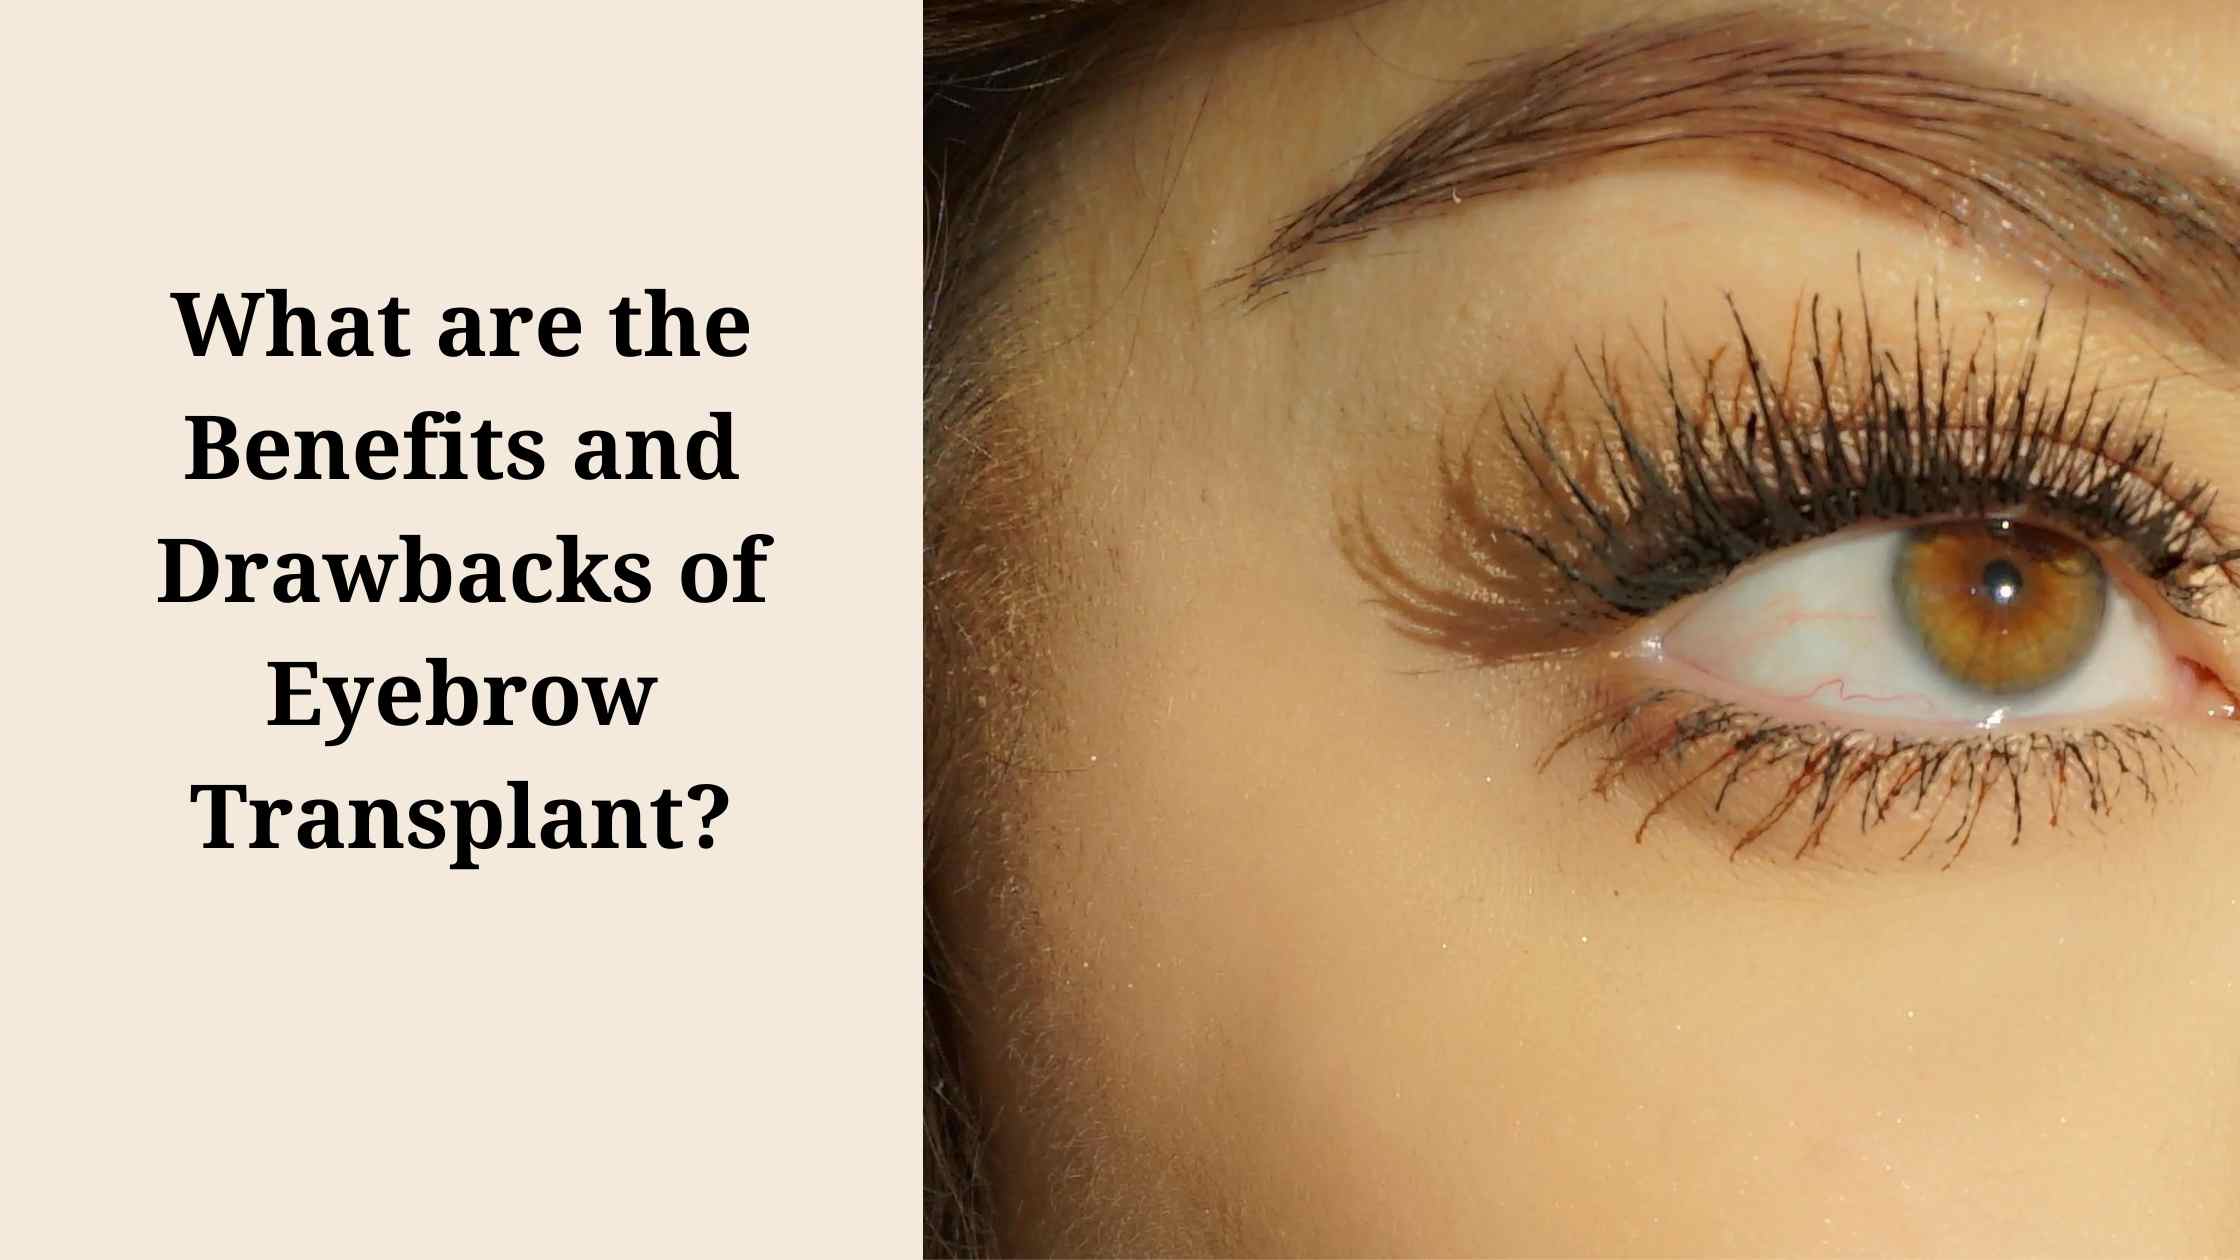 <strong>What are the Benefits and Drawbacks of Eyebrow Transplant?</strong>